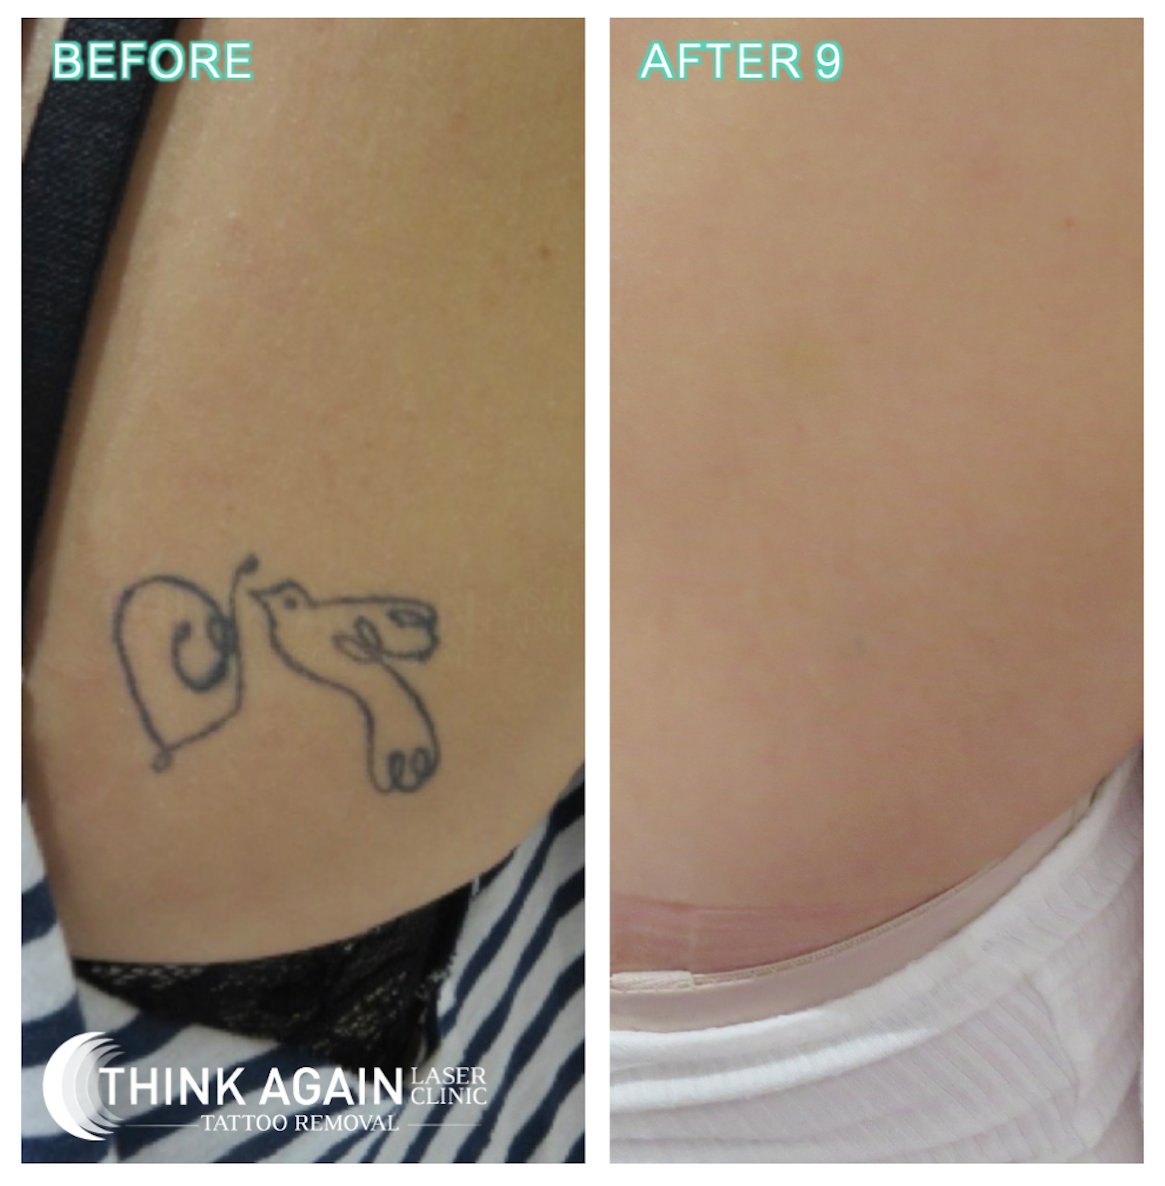 Inkfree MD  𝐁𝐞𝐟𝐨𝐫𝐞 𝐚𝐧𝐝 𝐀𝐟𝐭𝐞𝐫 Another example of our  amazingly fast tattoo removal results with our PicoPlus laser    The 3rd and final treatment was just to clean everything up